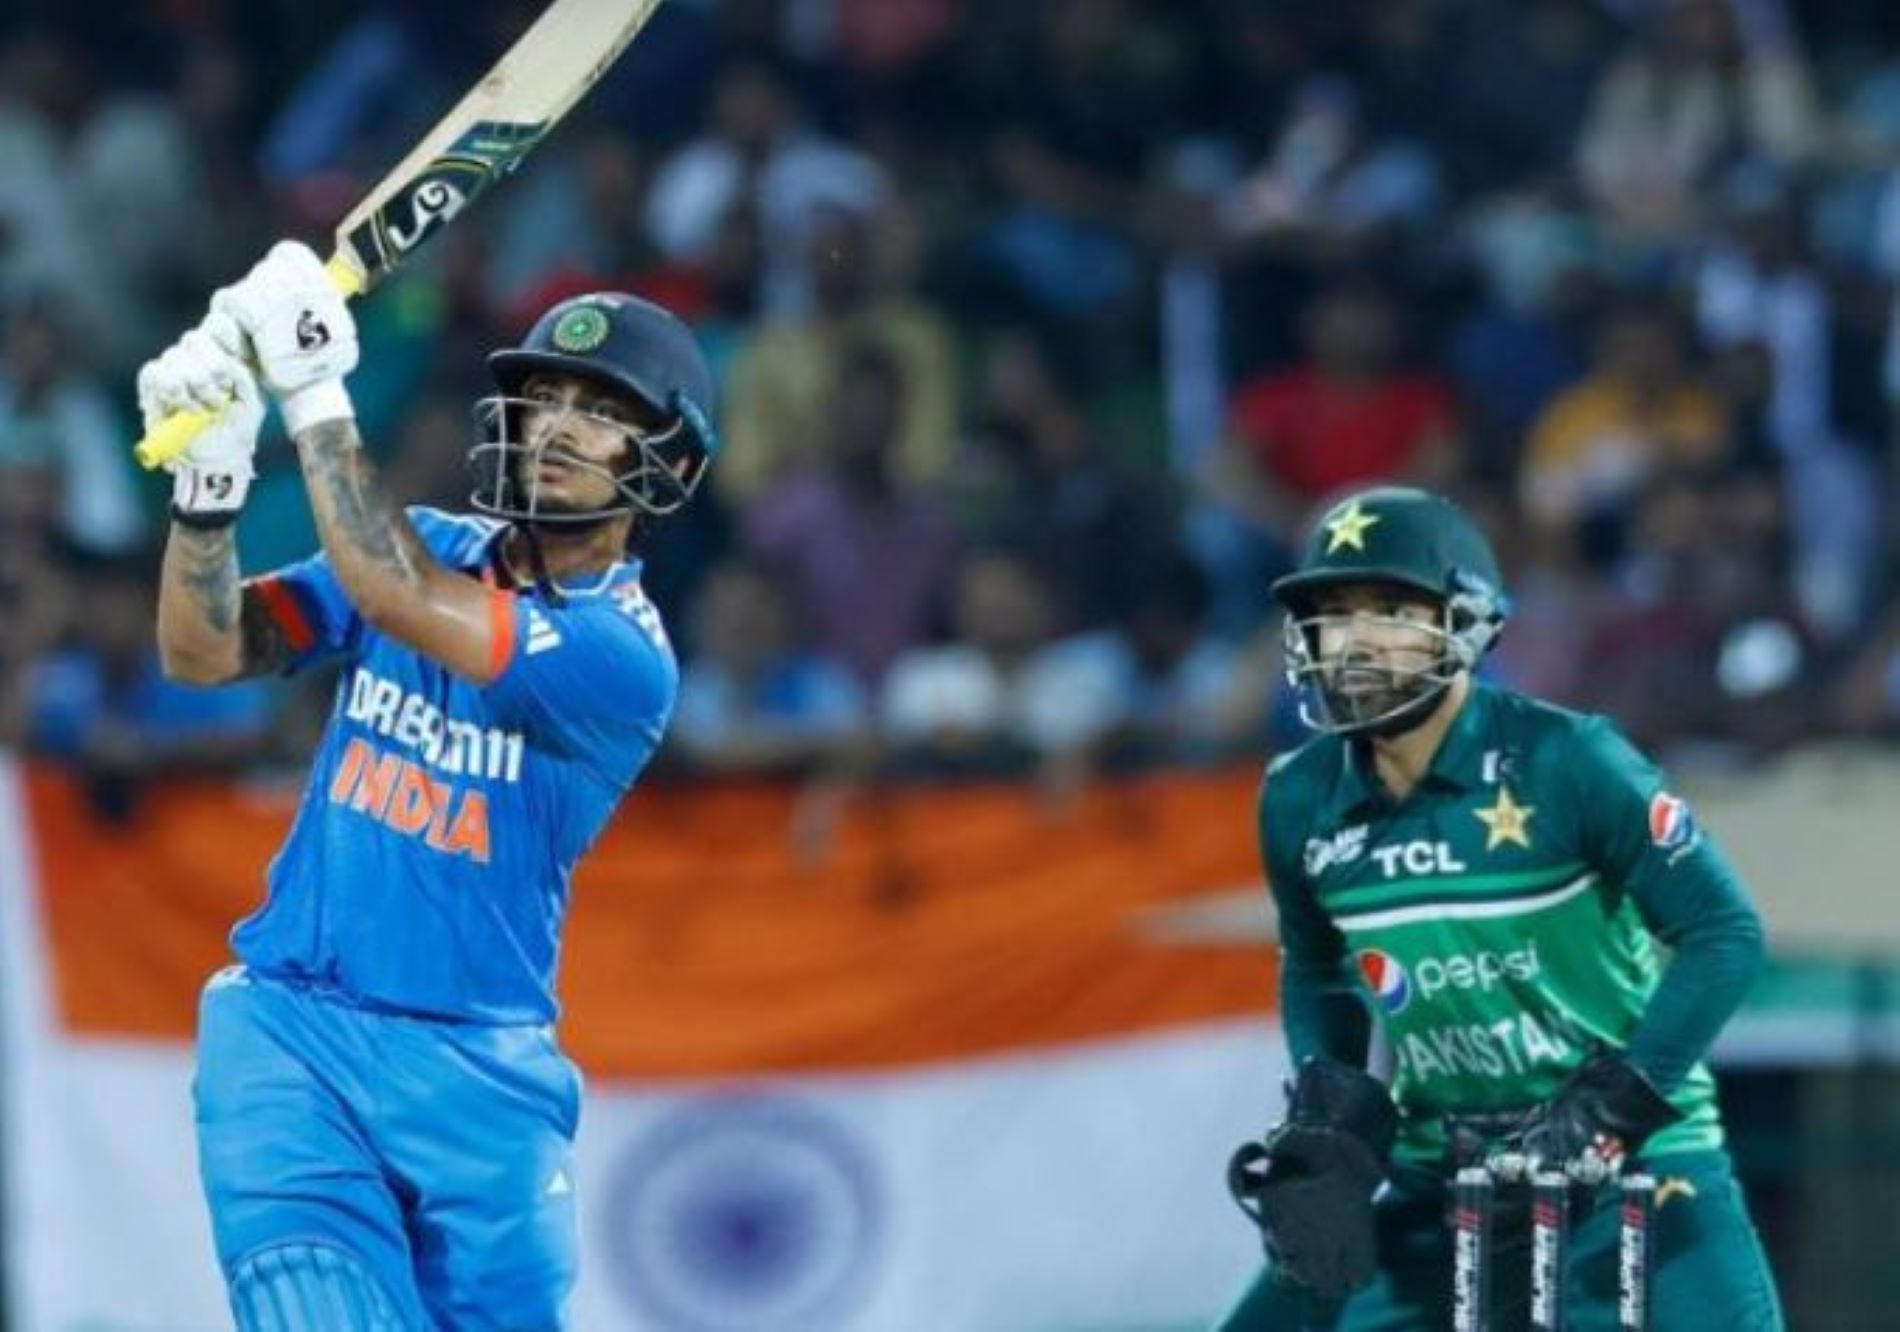 Kishan starred in the middle-order for India against Pakistan in the recent Asia Cup.